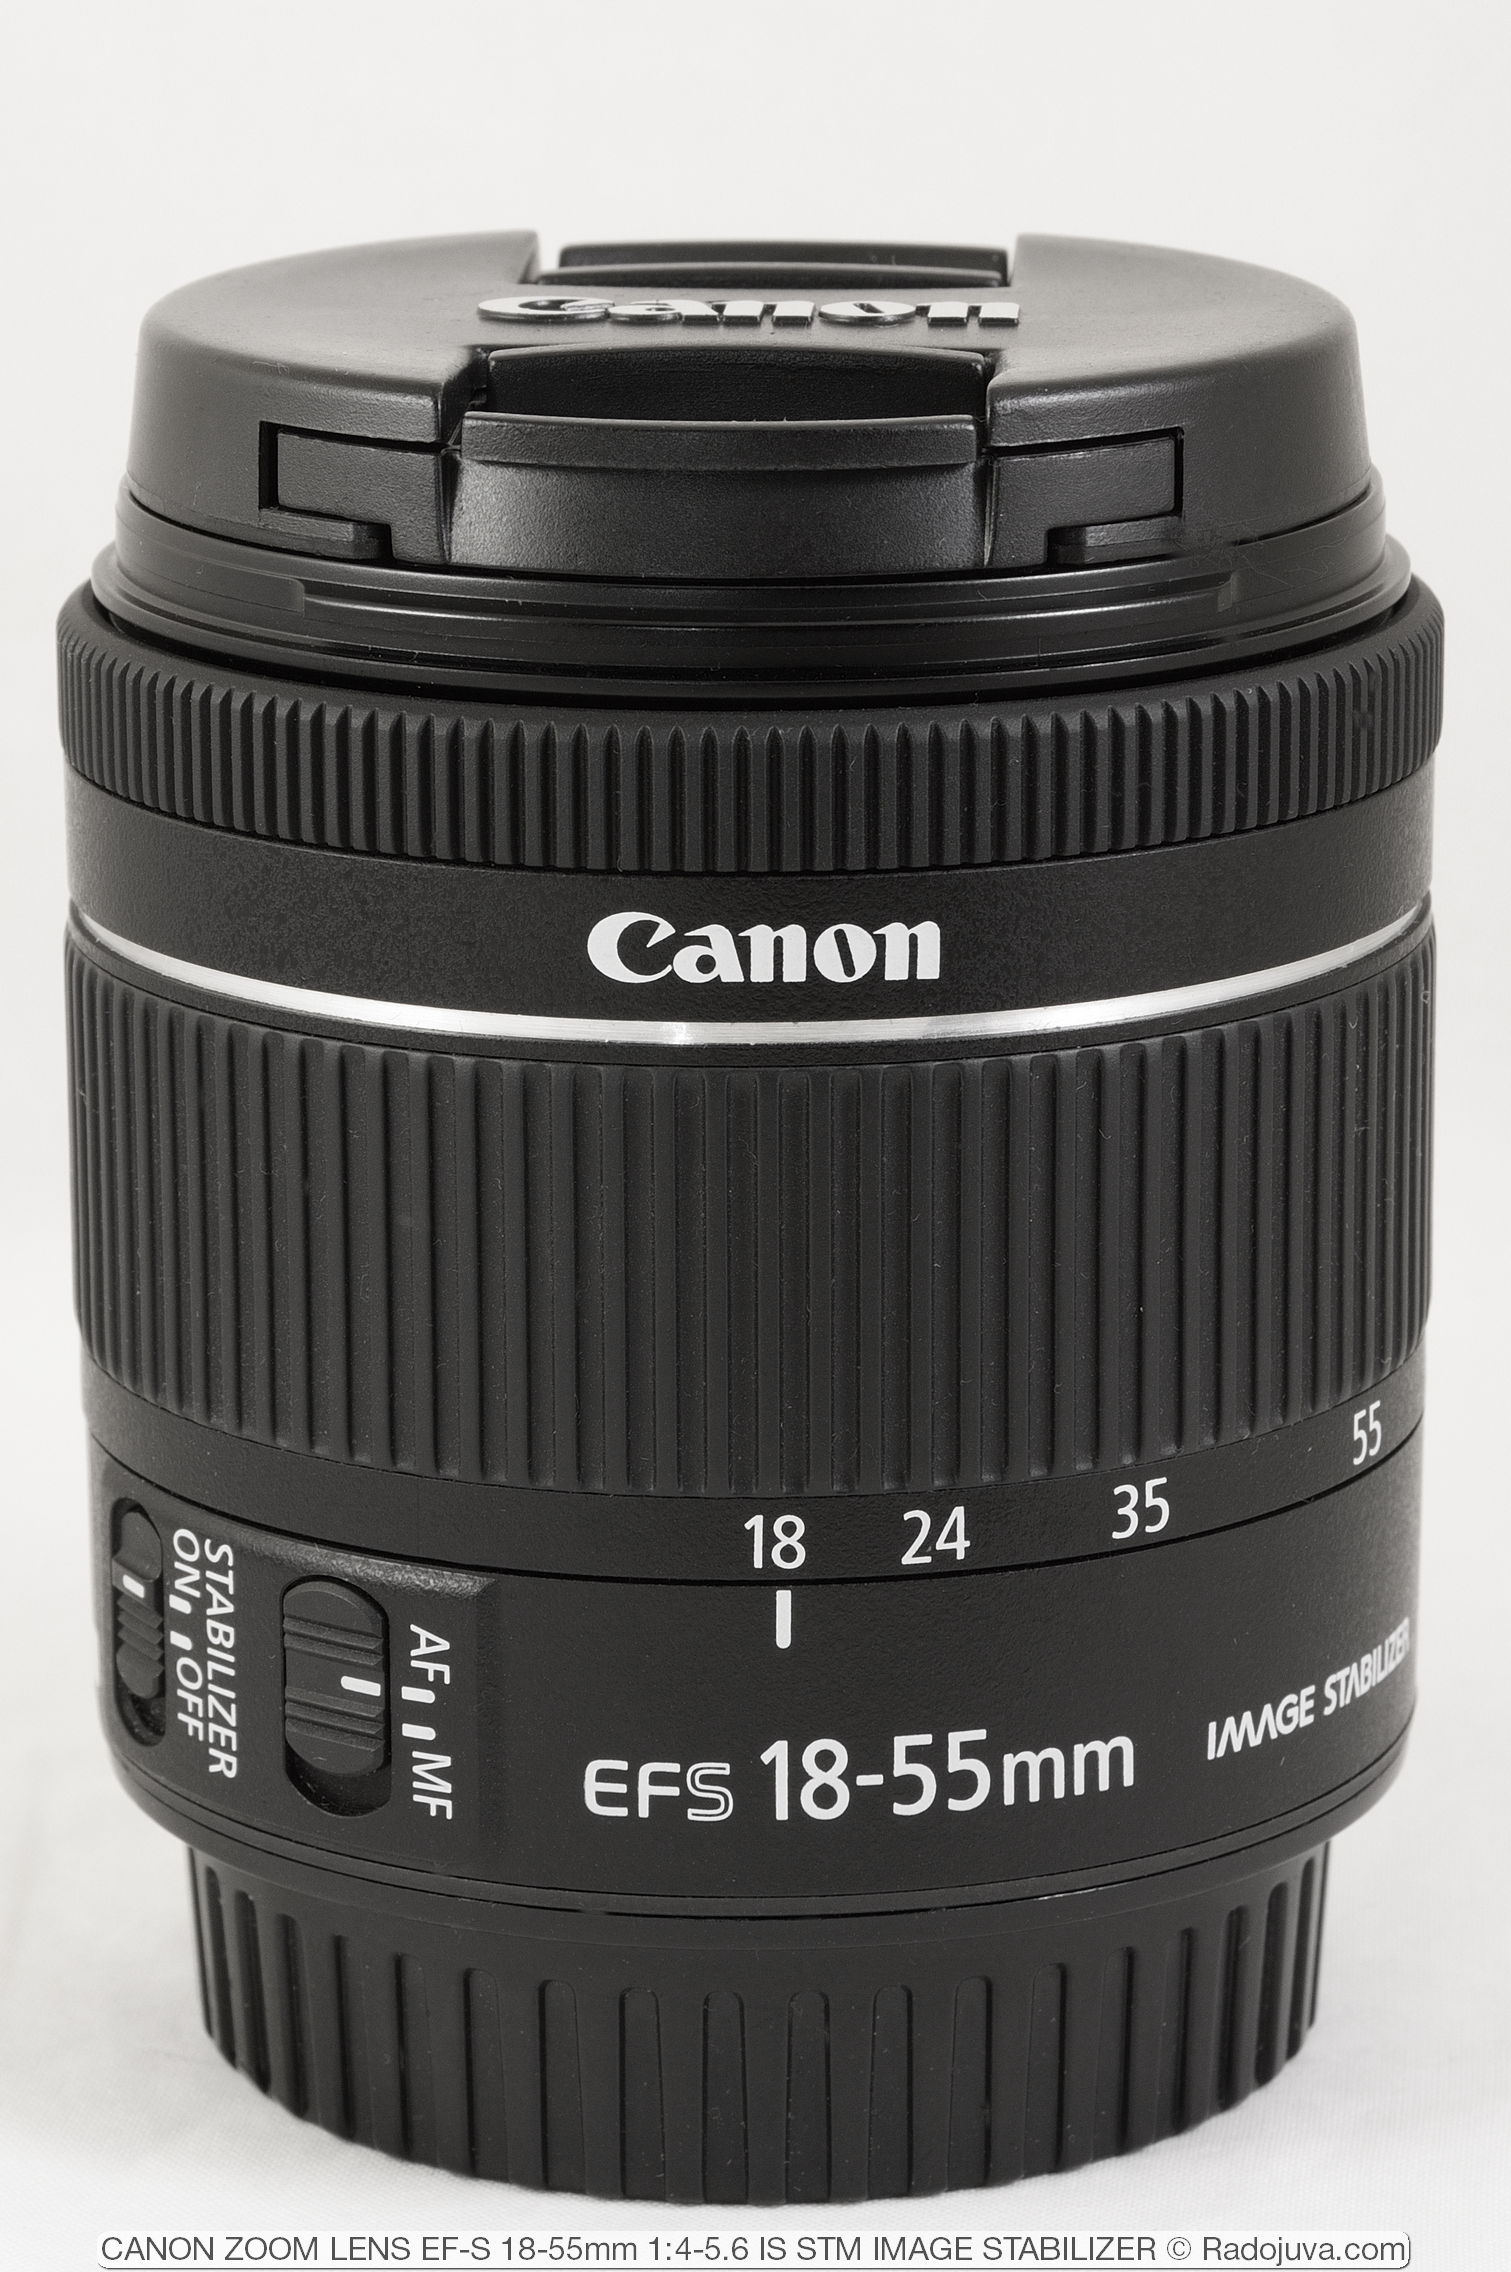 Review of Canon Zoom Lens EF-S 18-55mm 1: 4-5.6 IS STM | Happy